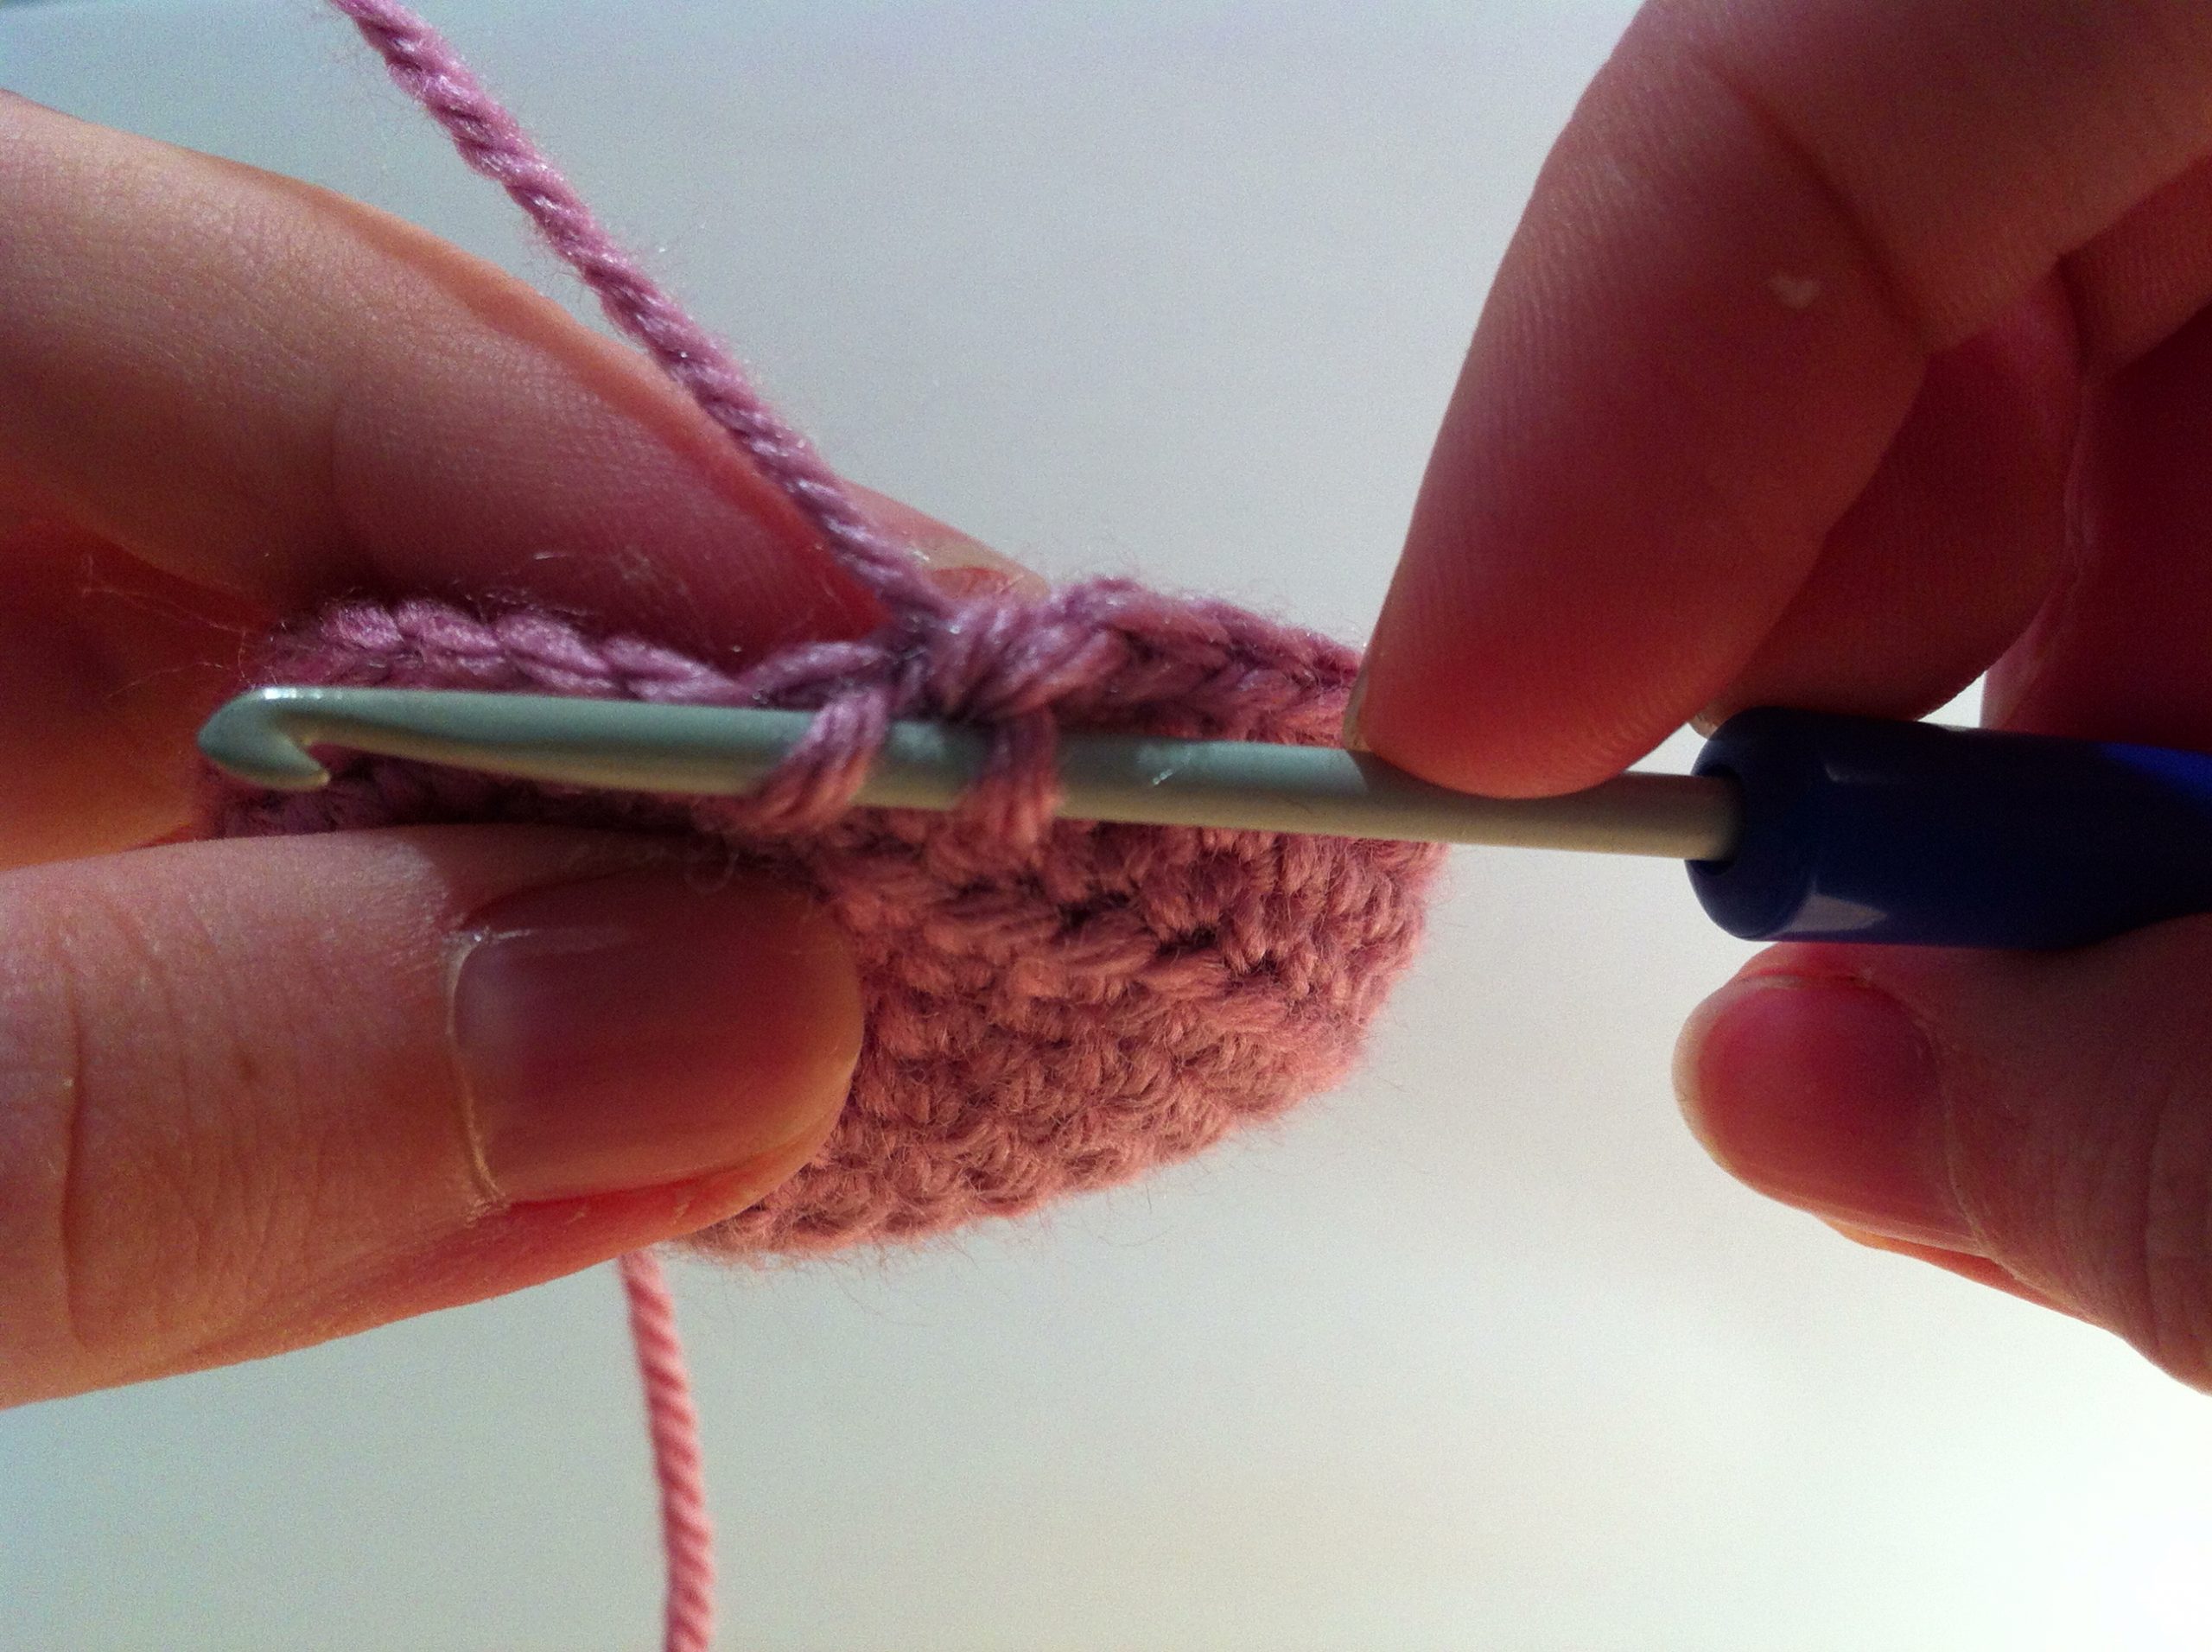 Crochet hook inserted into the front loop only